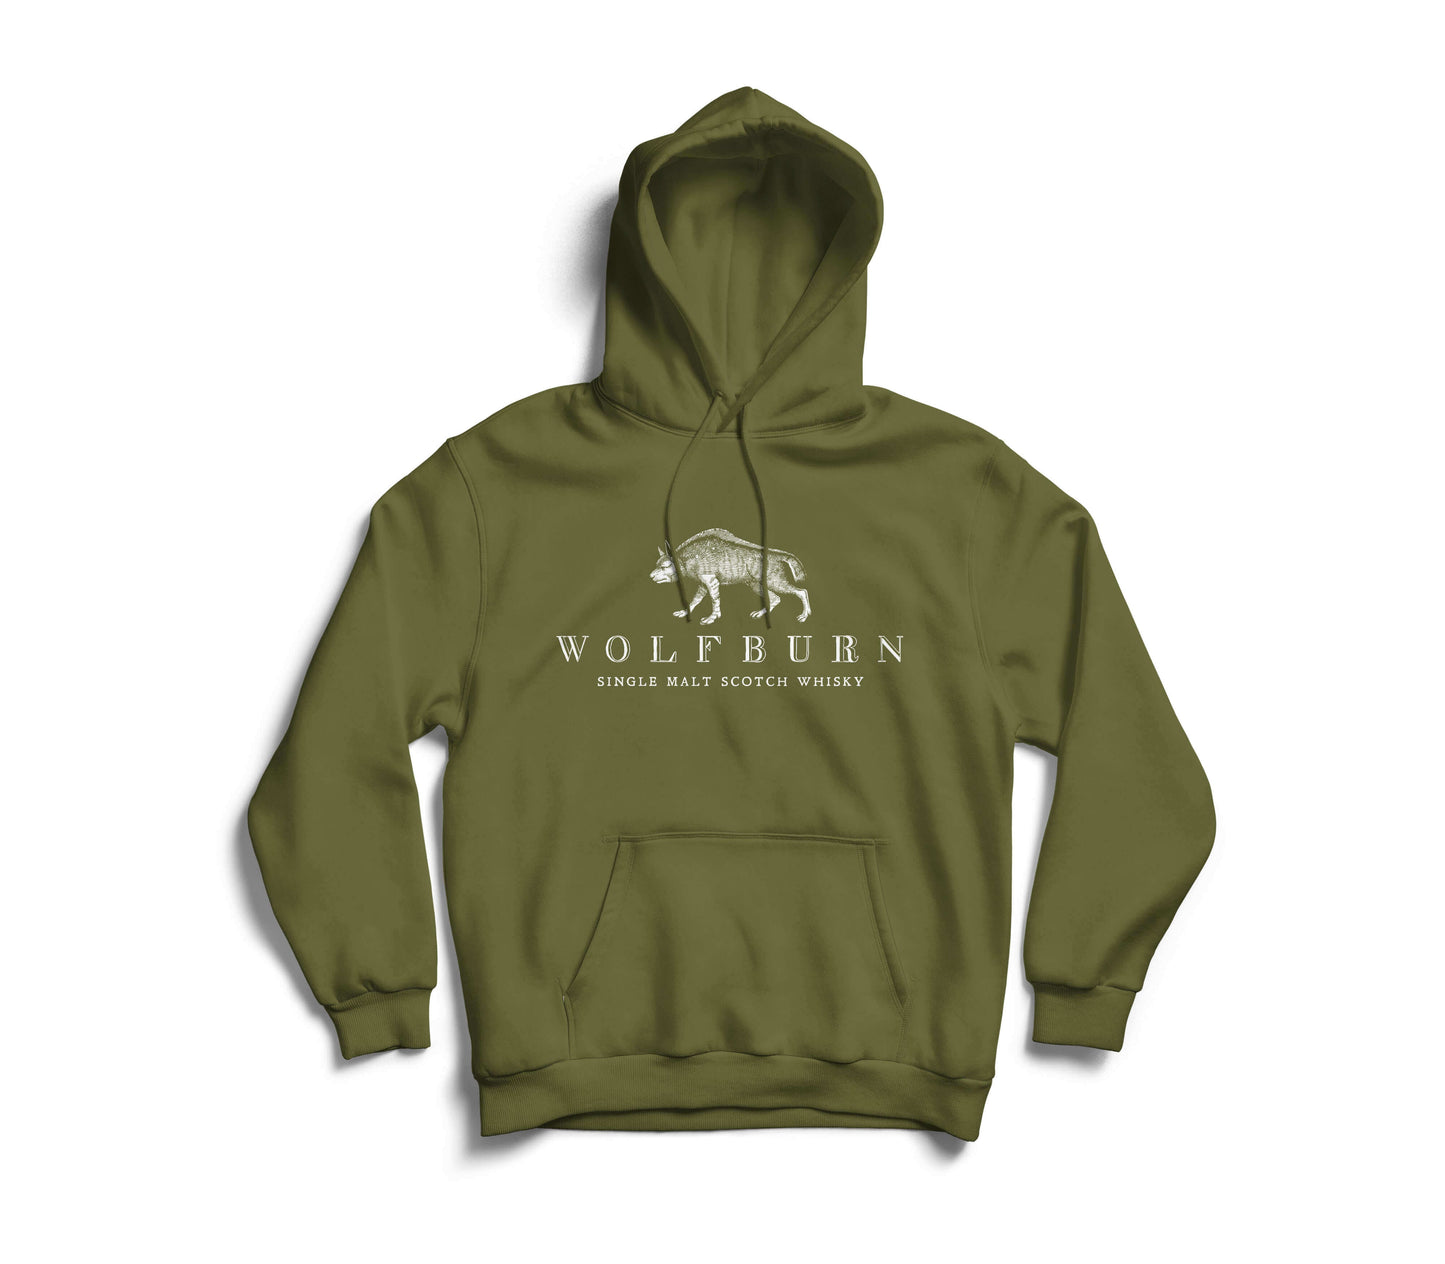 Wolfburn Hoodie ‘The Brave’ Army Green Hooded top. Screen printed 'Wolfburn' logo on the chest and large 'The Brave' on the back.